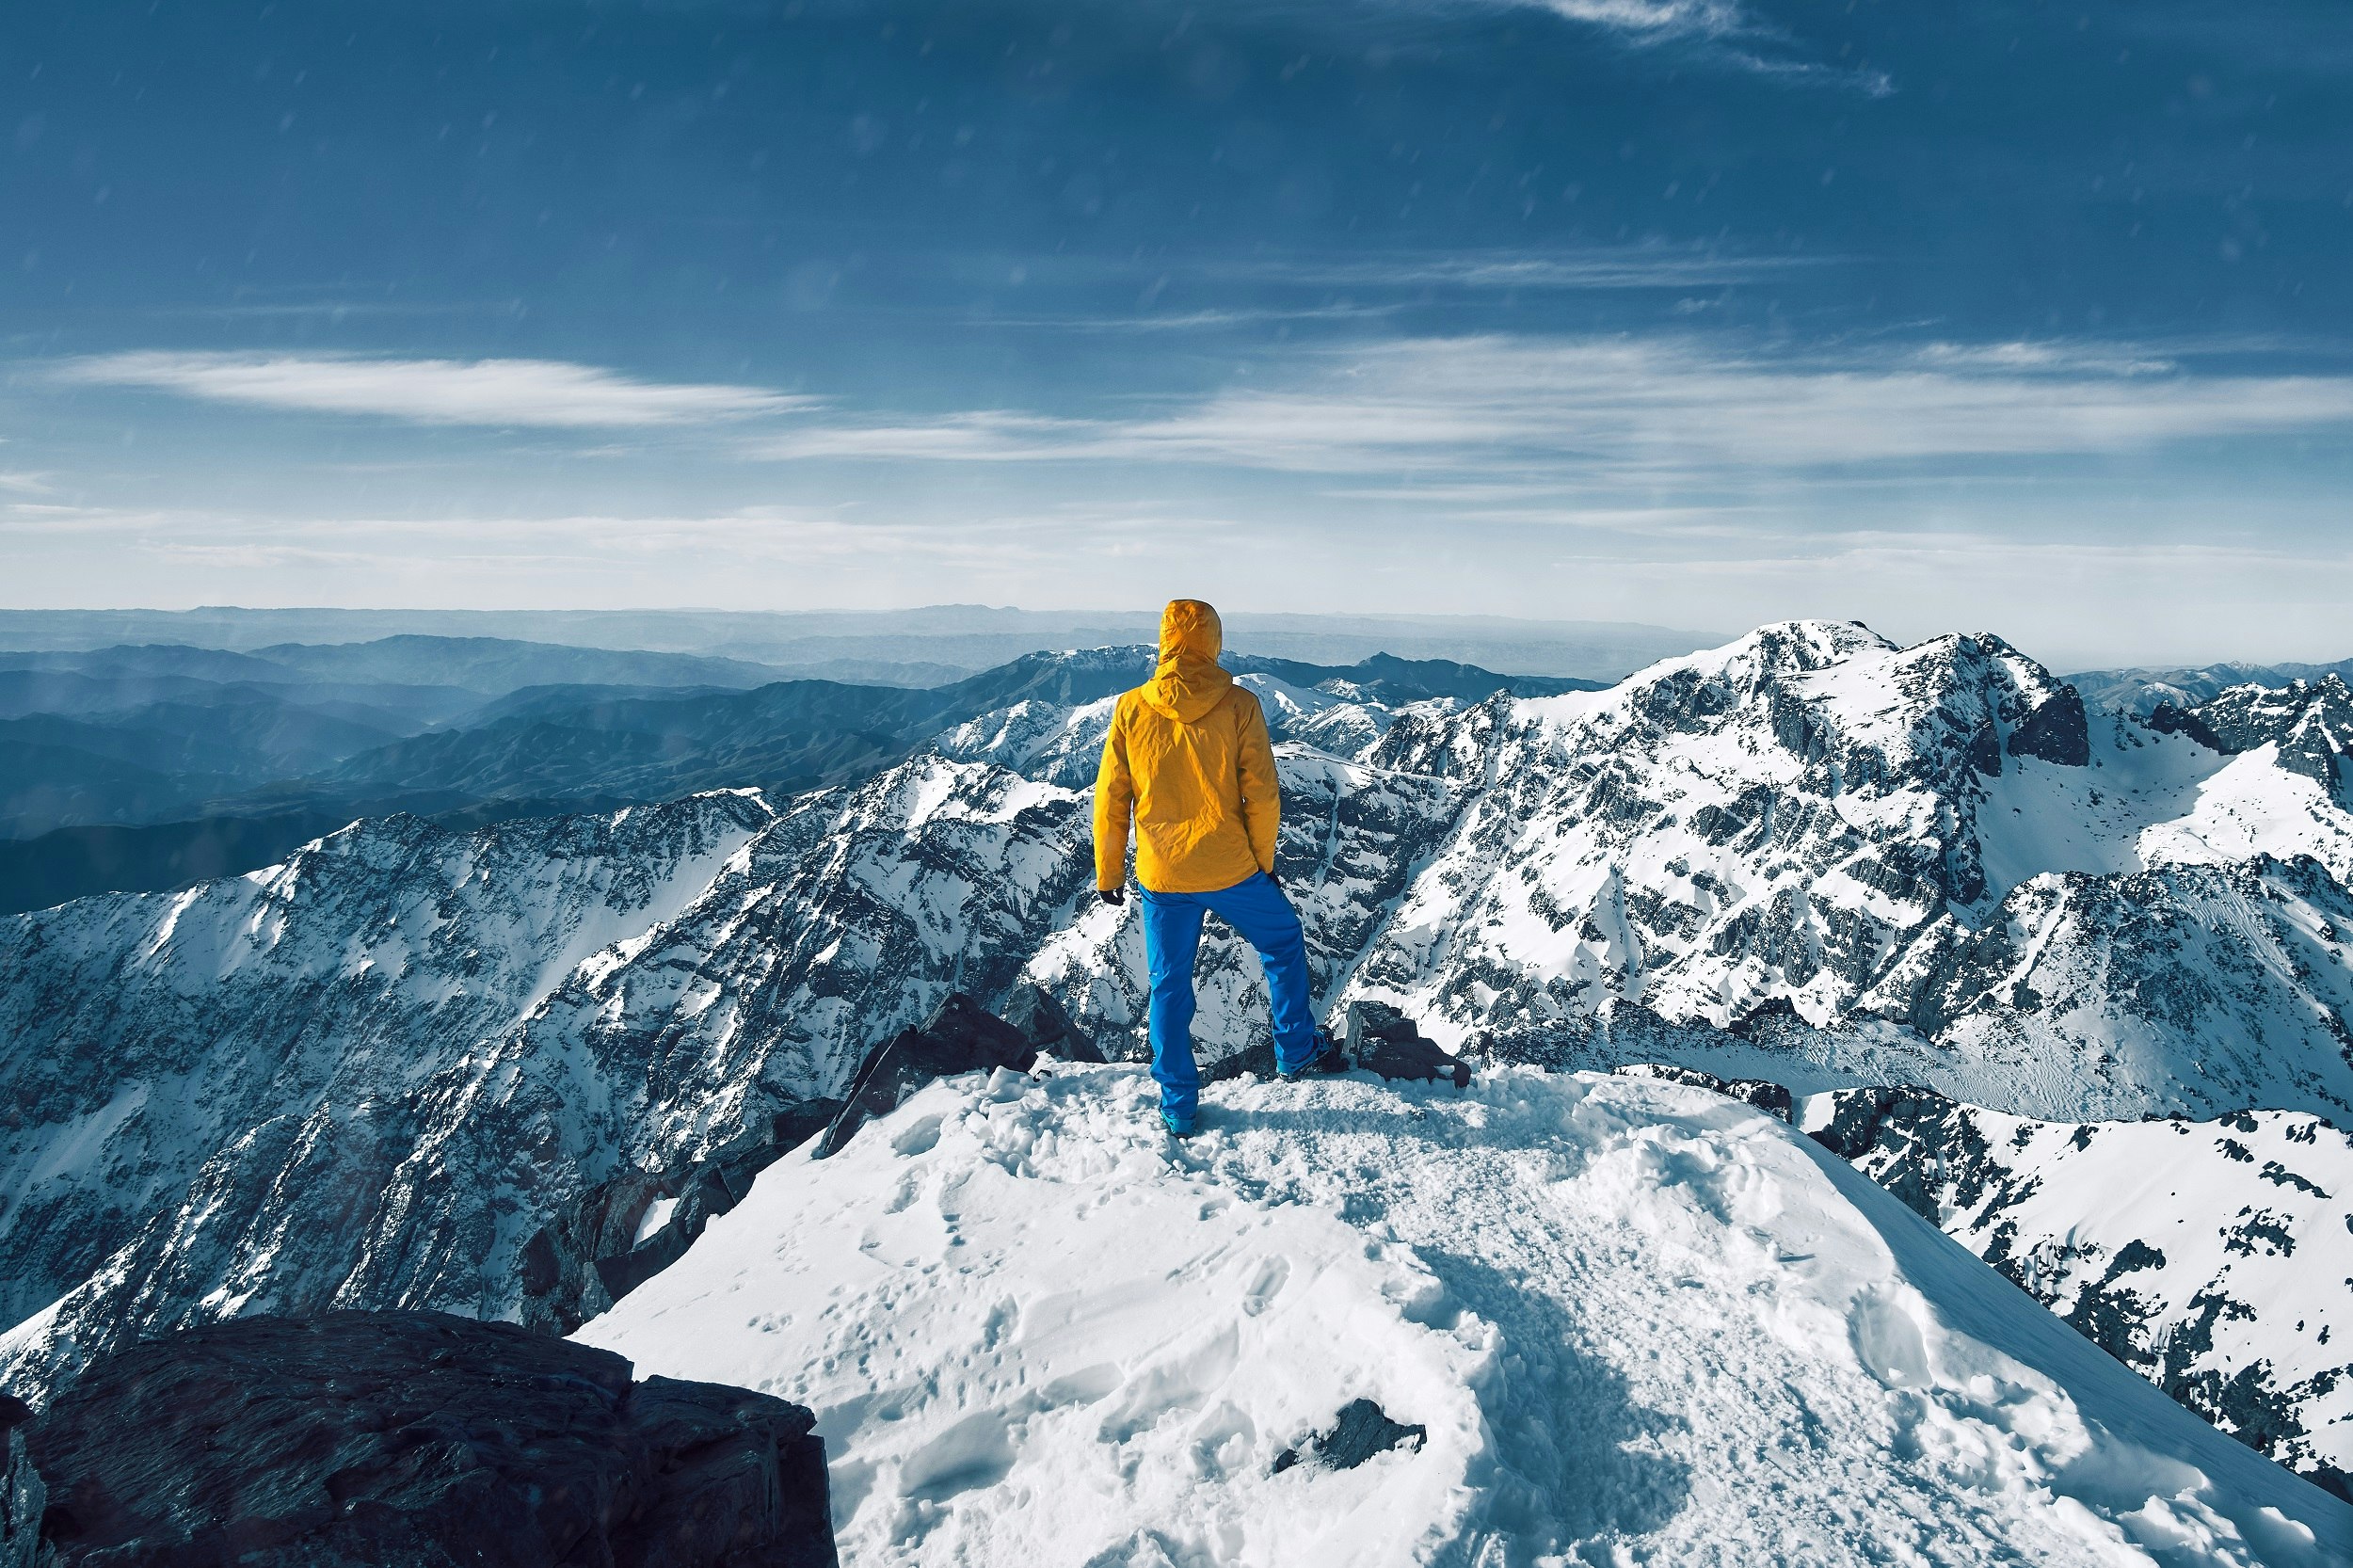 A climber in a yellow jacket and blue trousers stands with their back to the camera on the snowy summit of Toubkal; in the distance are more snow-covered peaks beneath a blue sky.